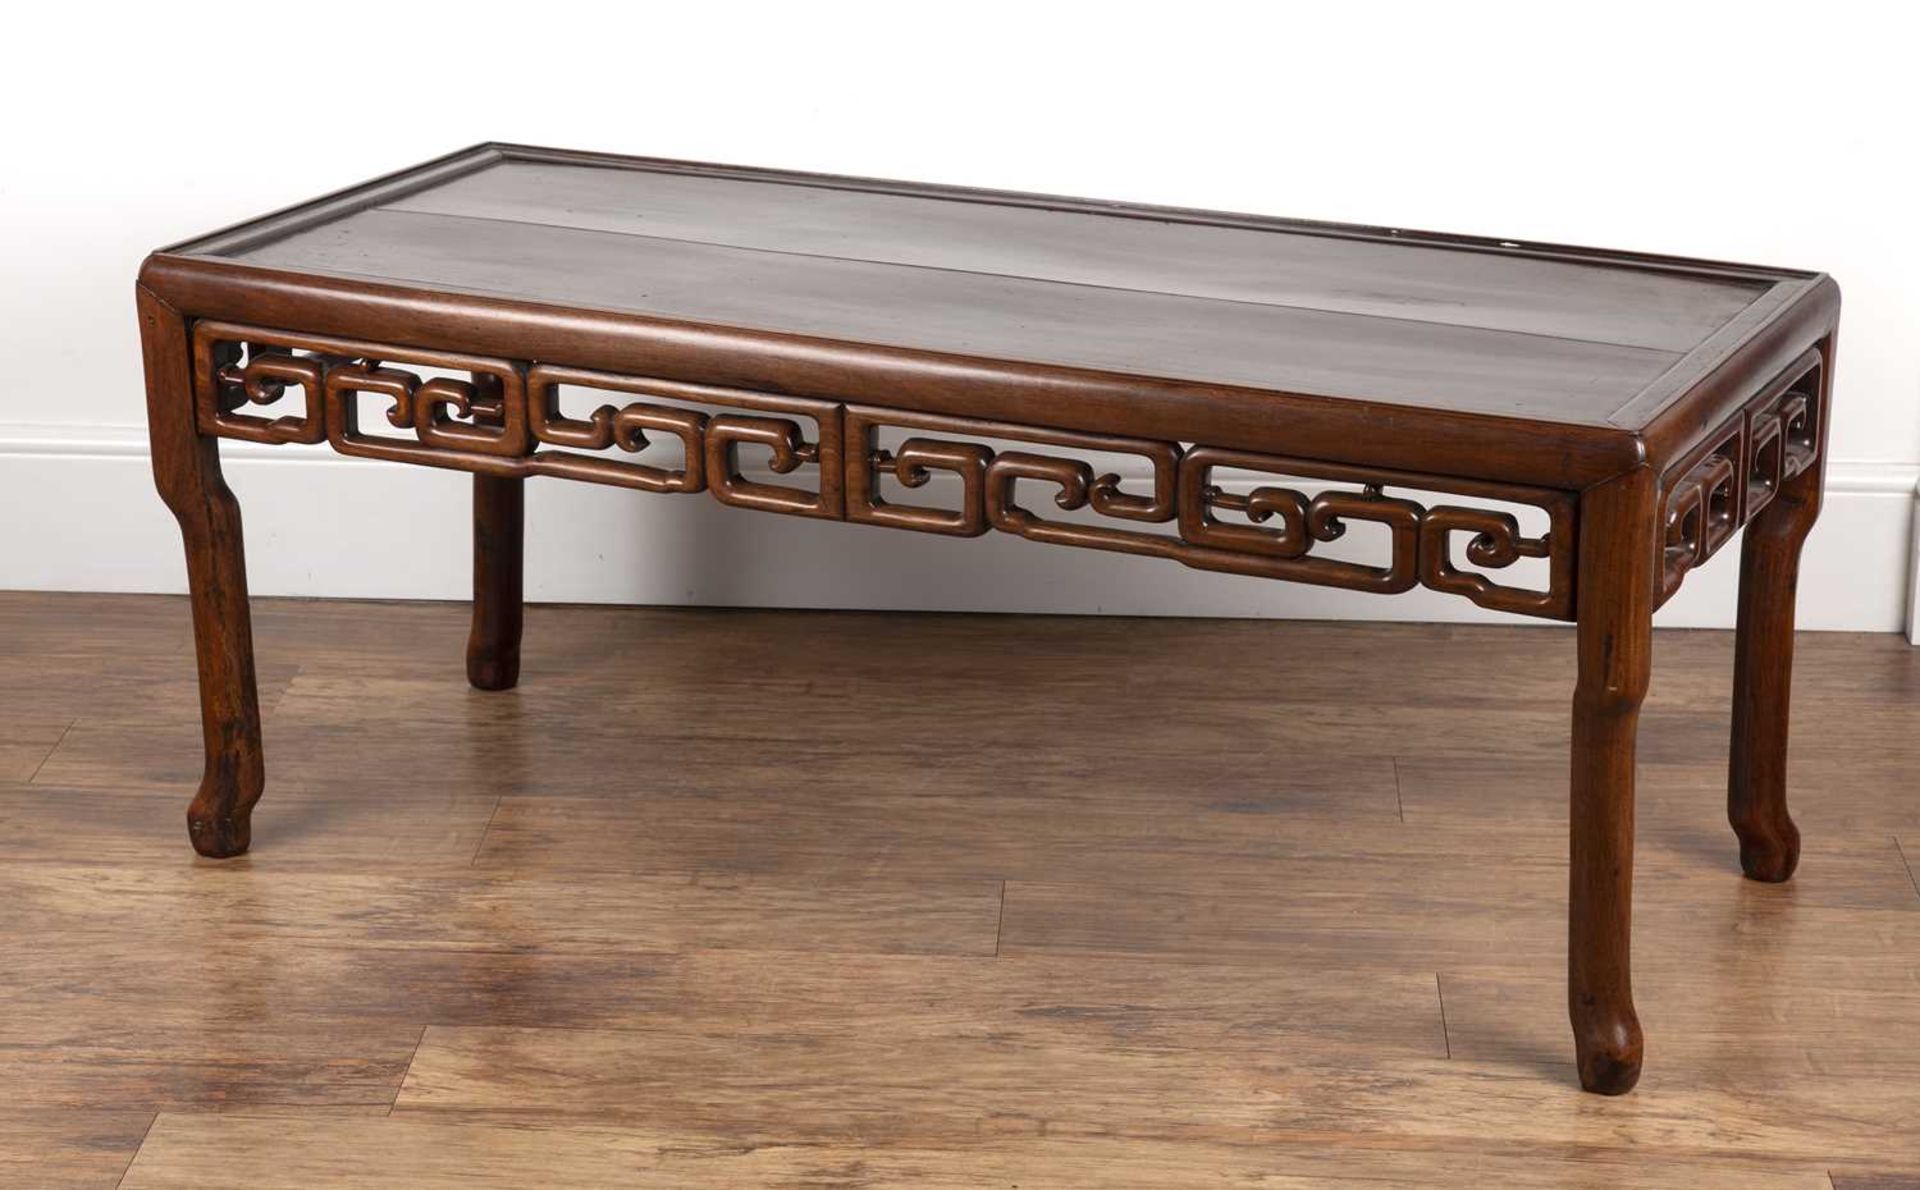 Chinese Hardwood low table 19th Century, with scroll frieze and shaped supports, 127cm long, 56cm - Image 3 of 5